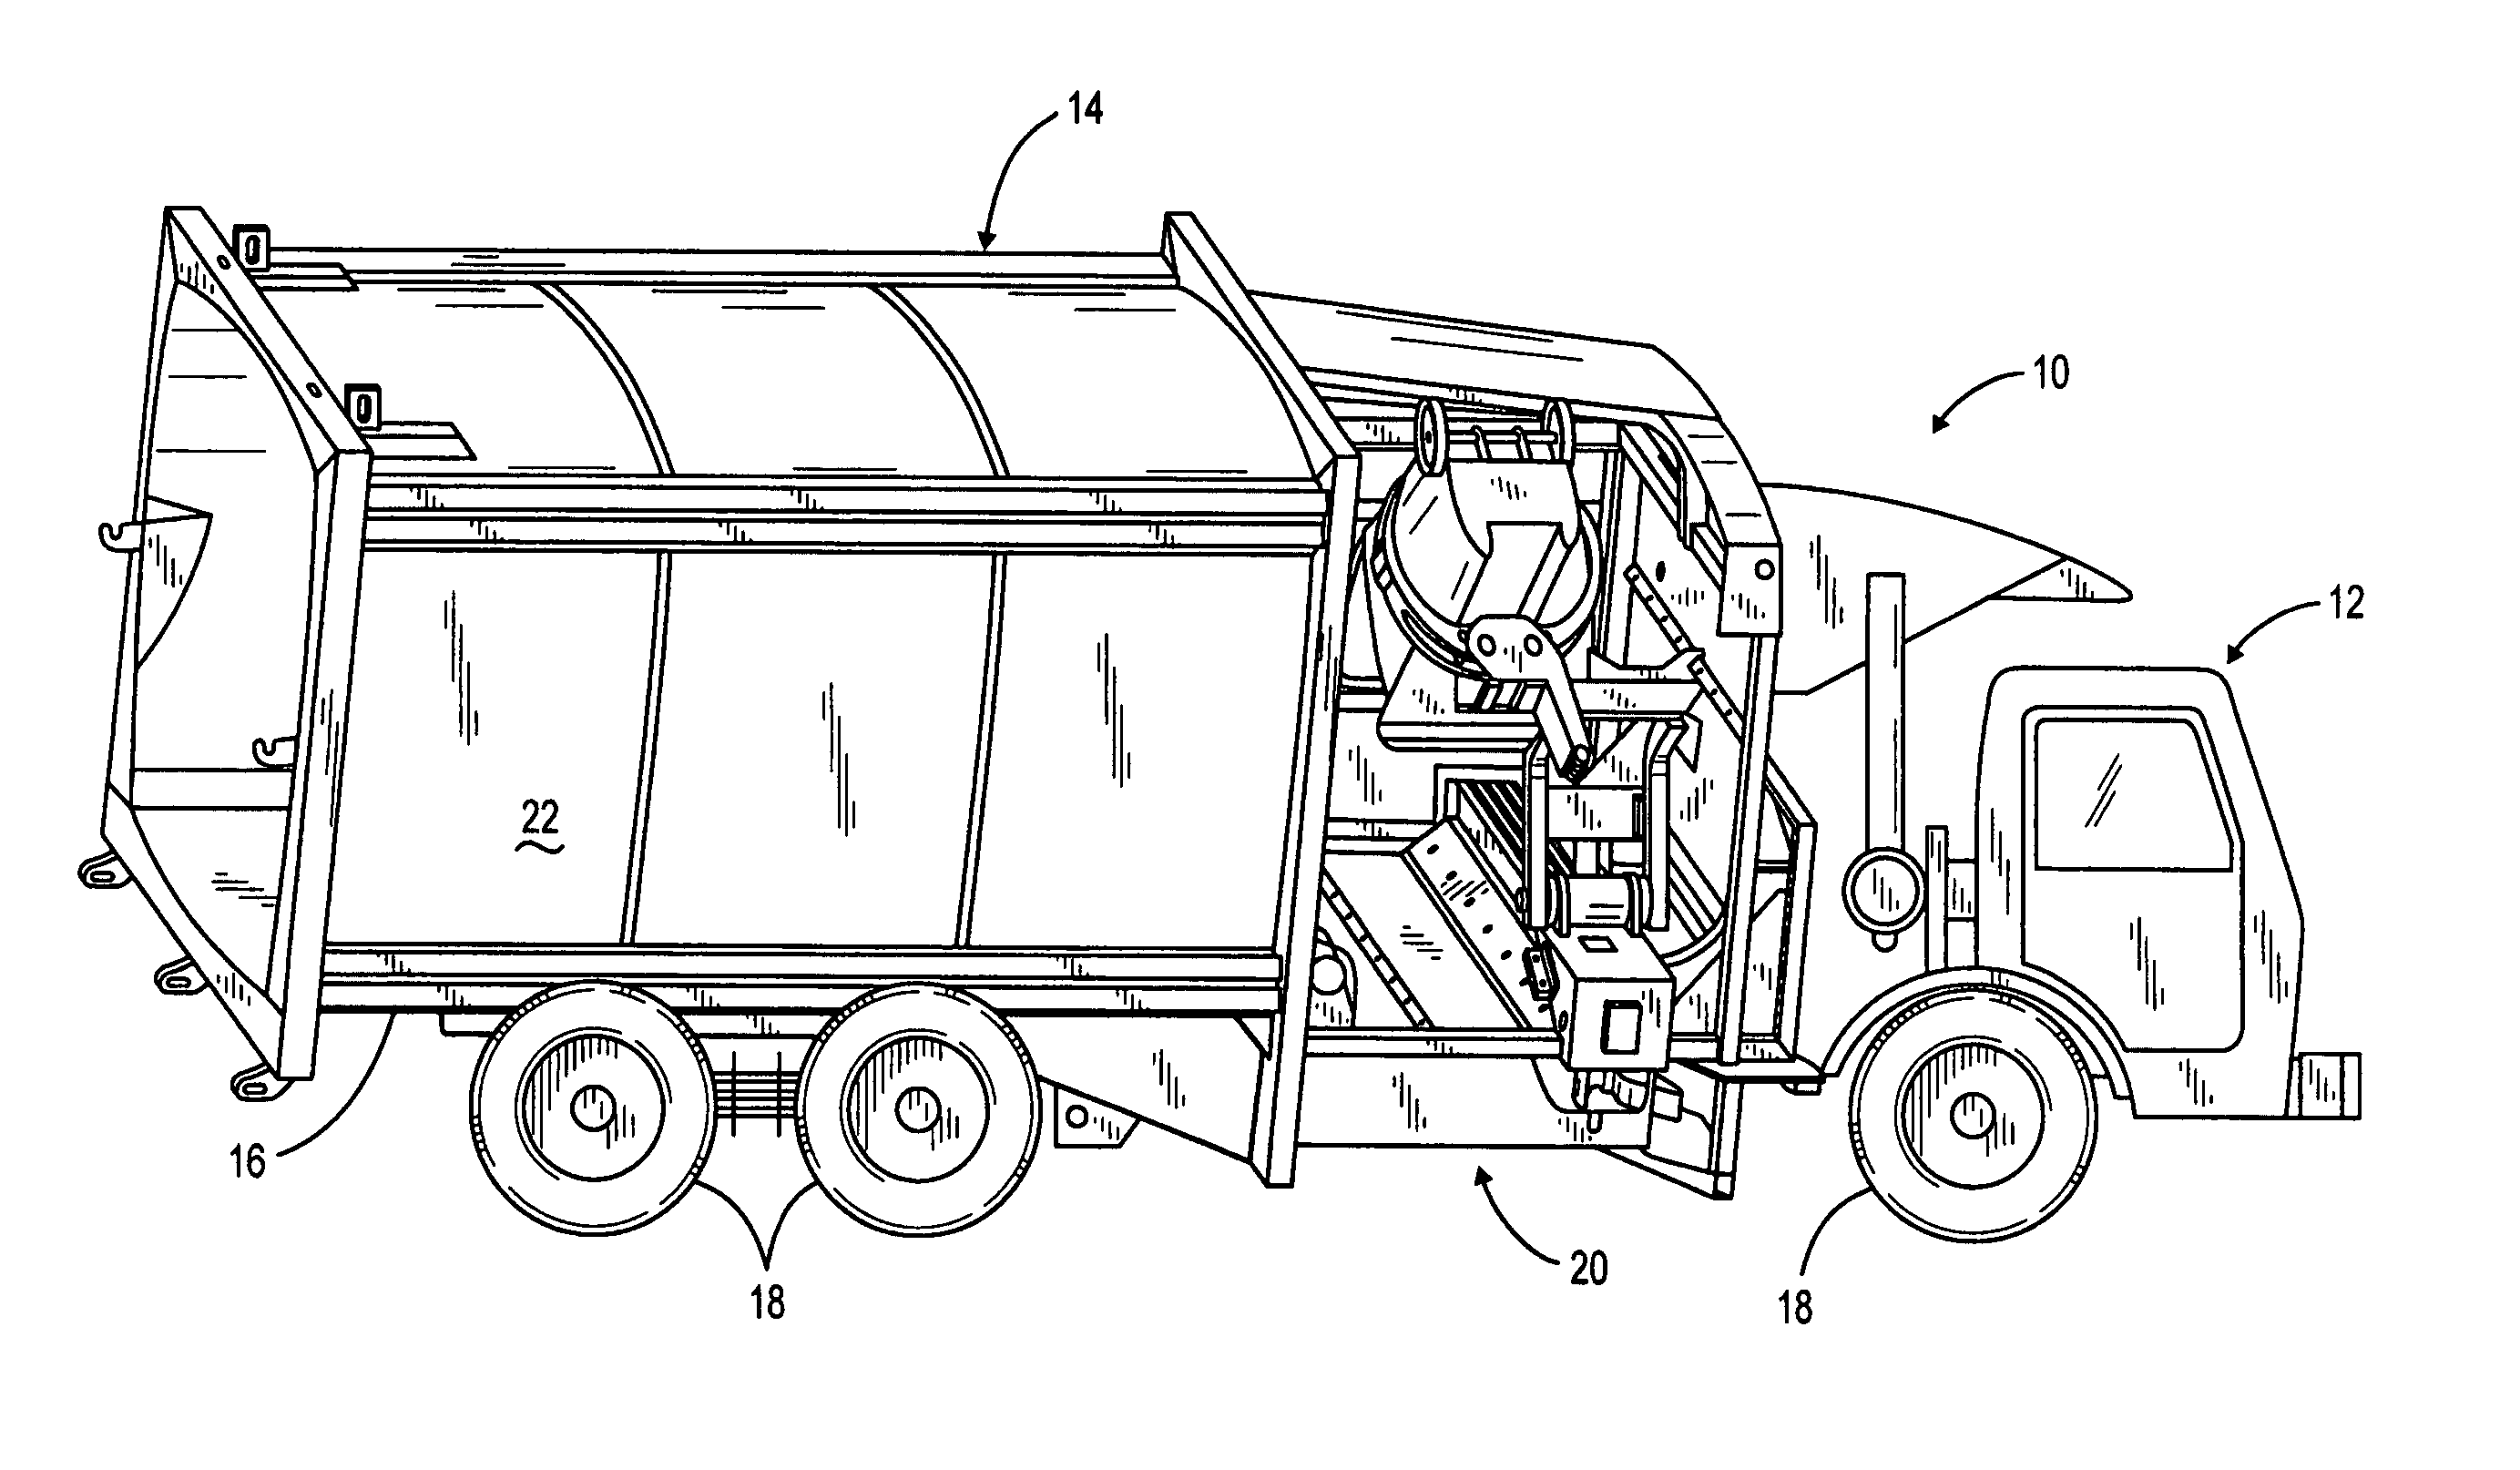 Refuse vehicle packing system